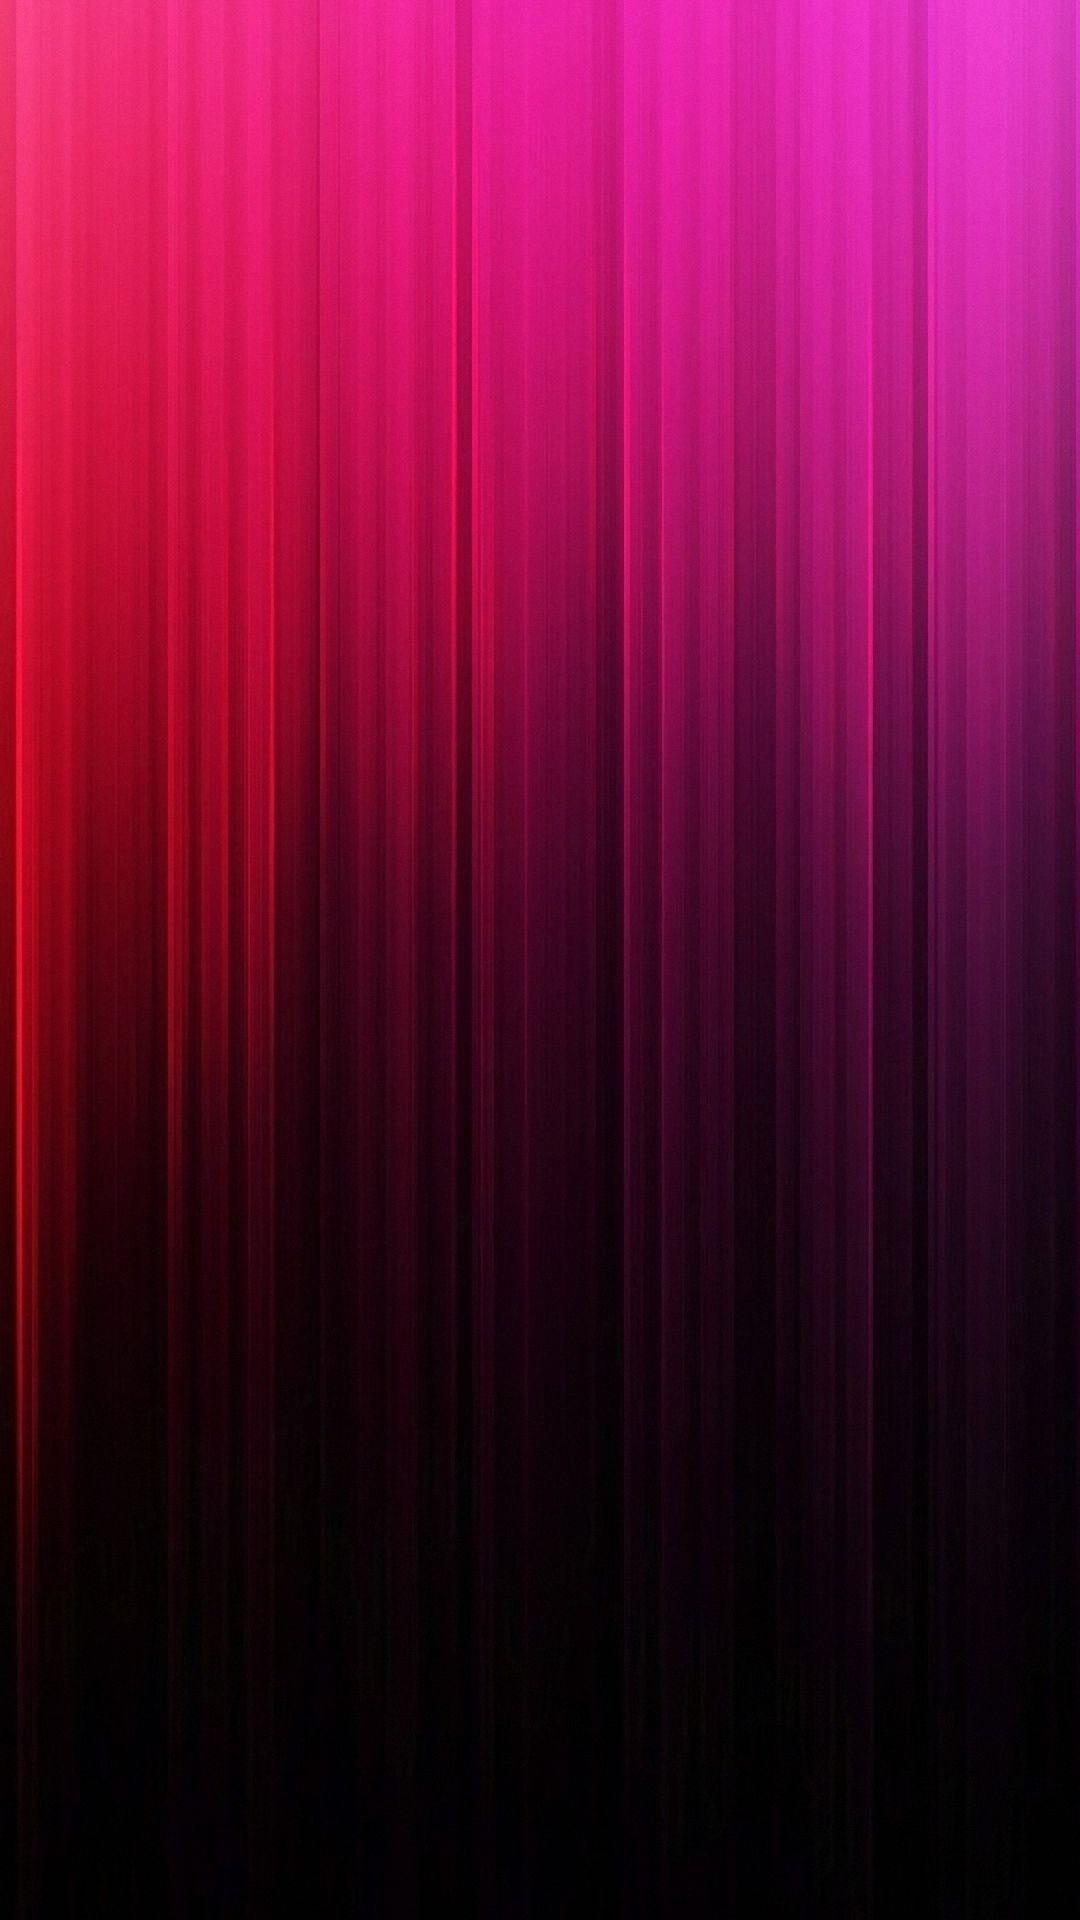 1080x1920 HD Miscellaneous Wallpapers - Wallpaper Cave